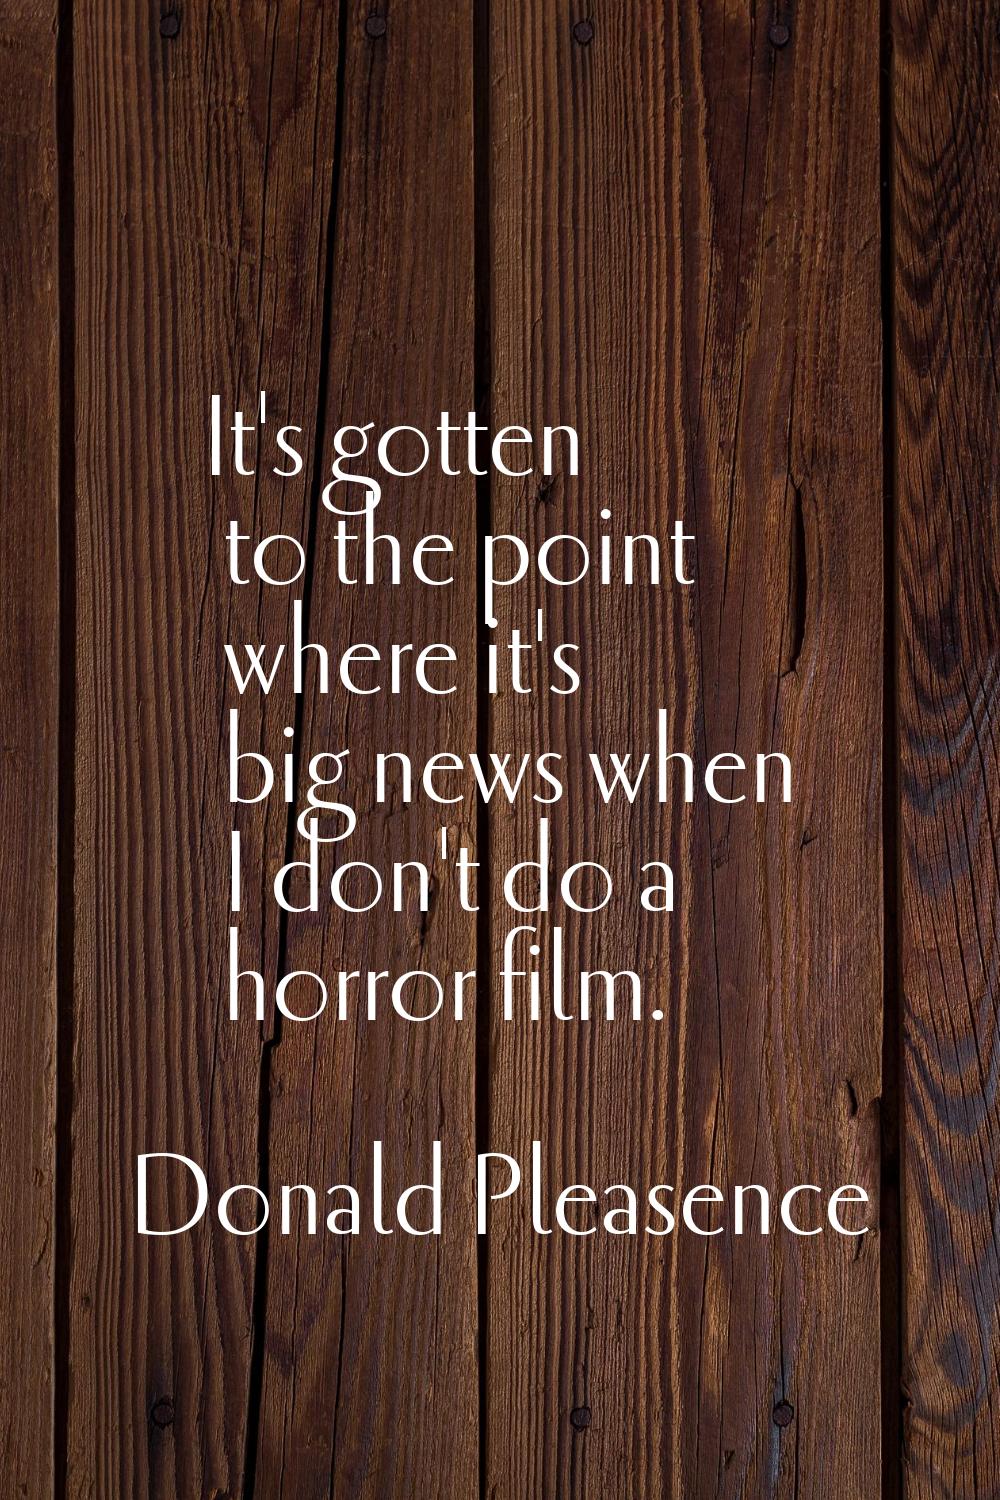 It's gotten to the point where it's big news when I don't do a horror film.